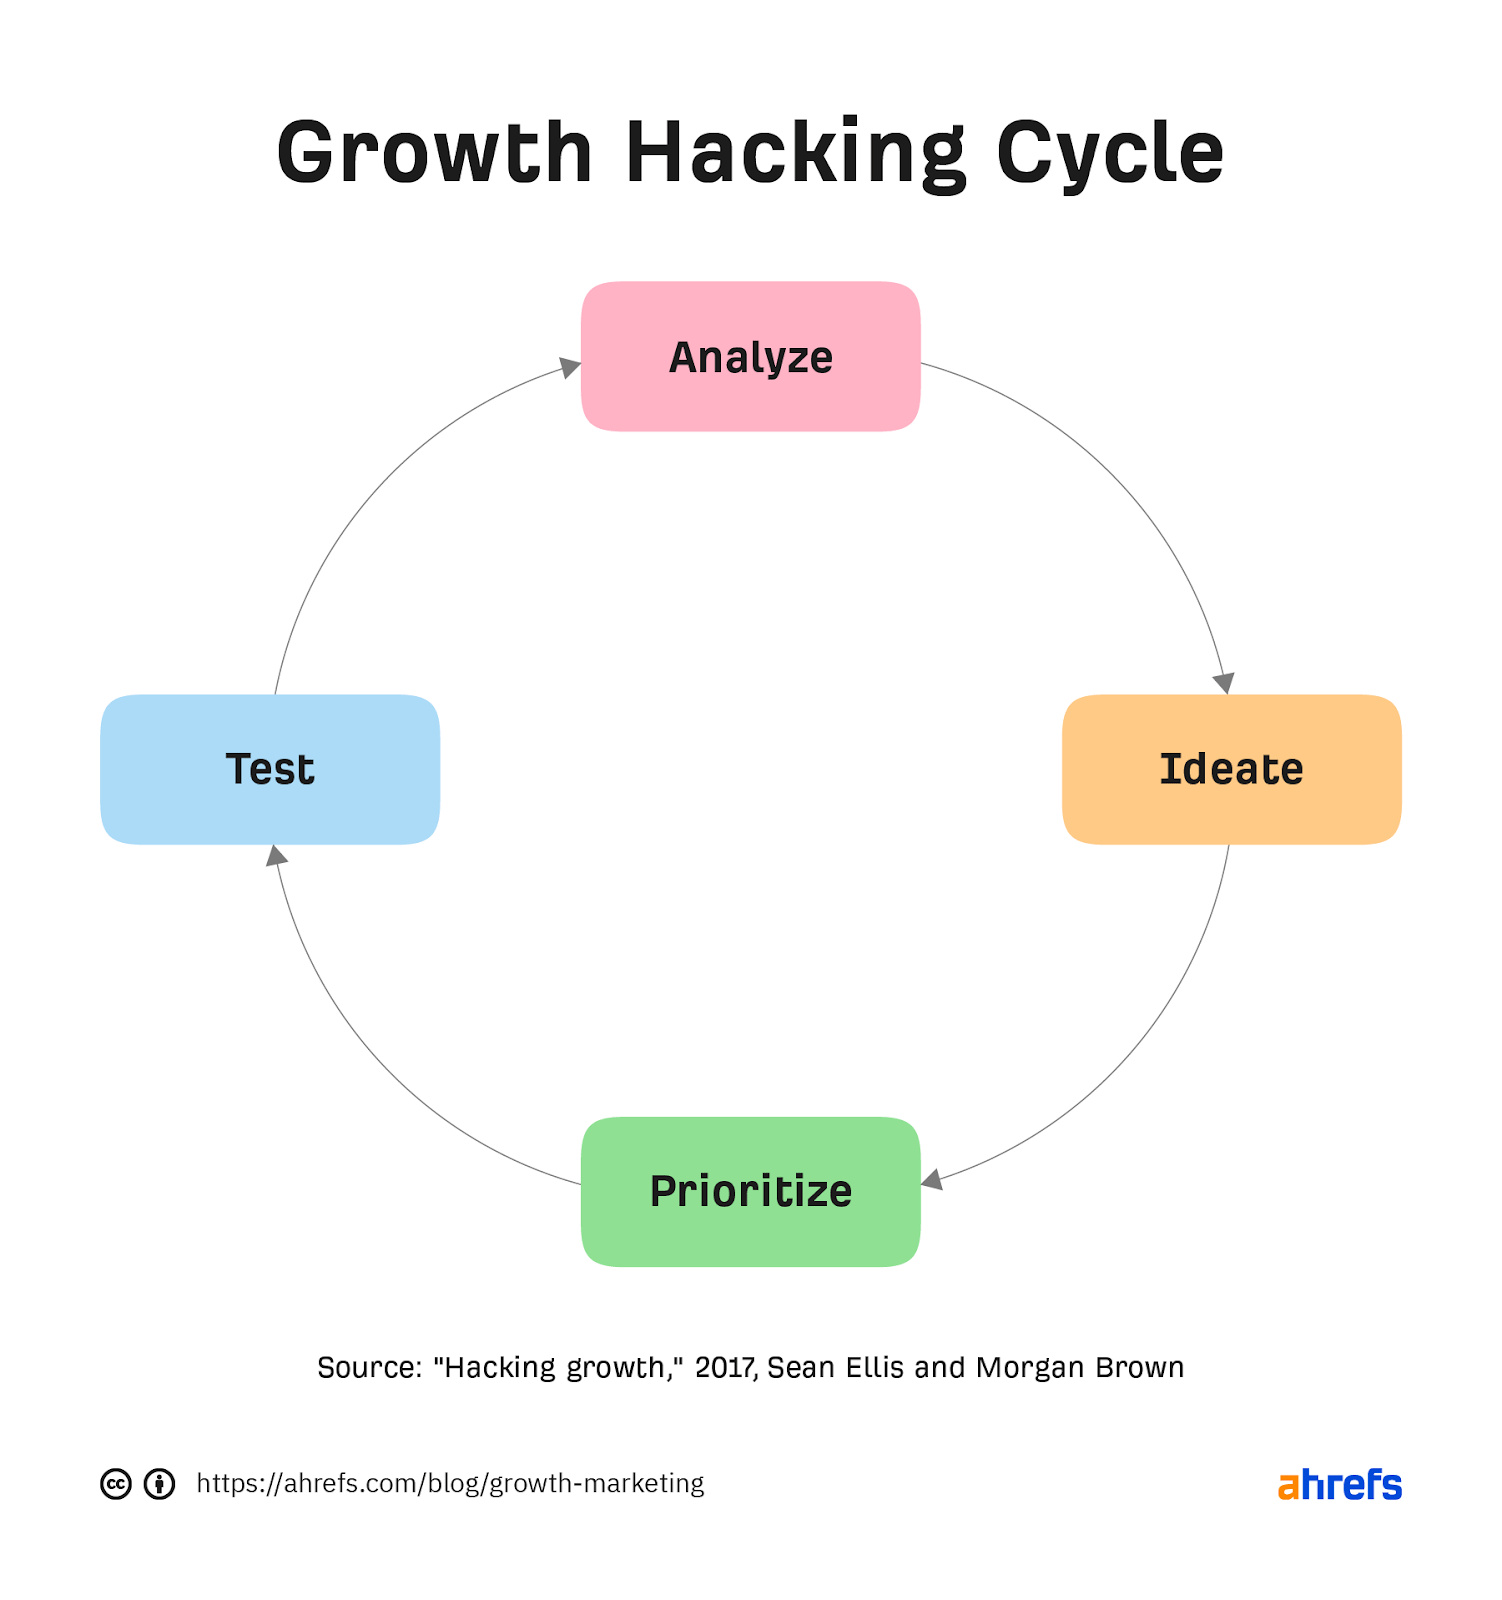 Growth hacking cycle: analyze, ideate, prioritize, test